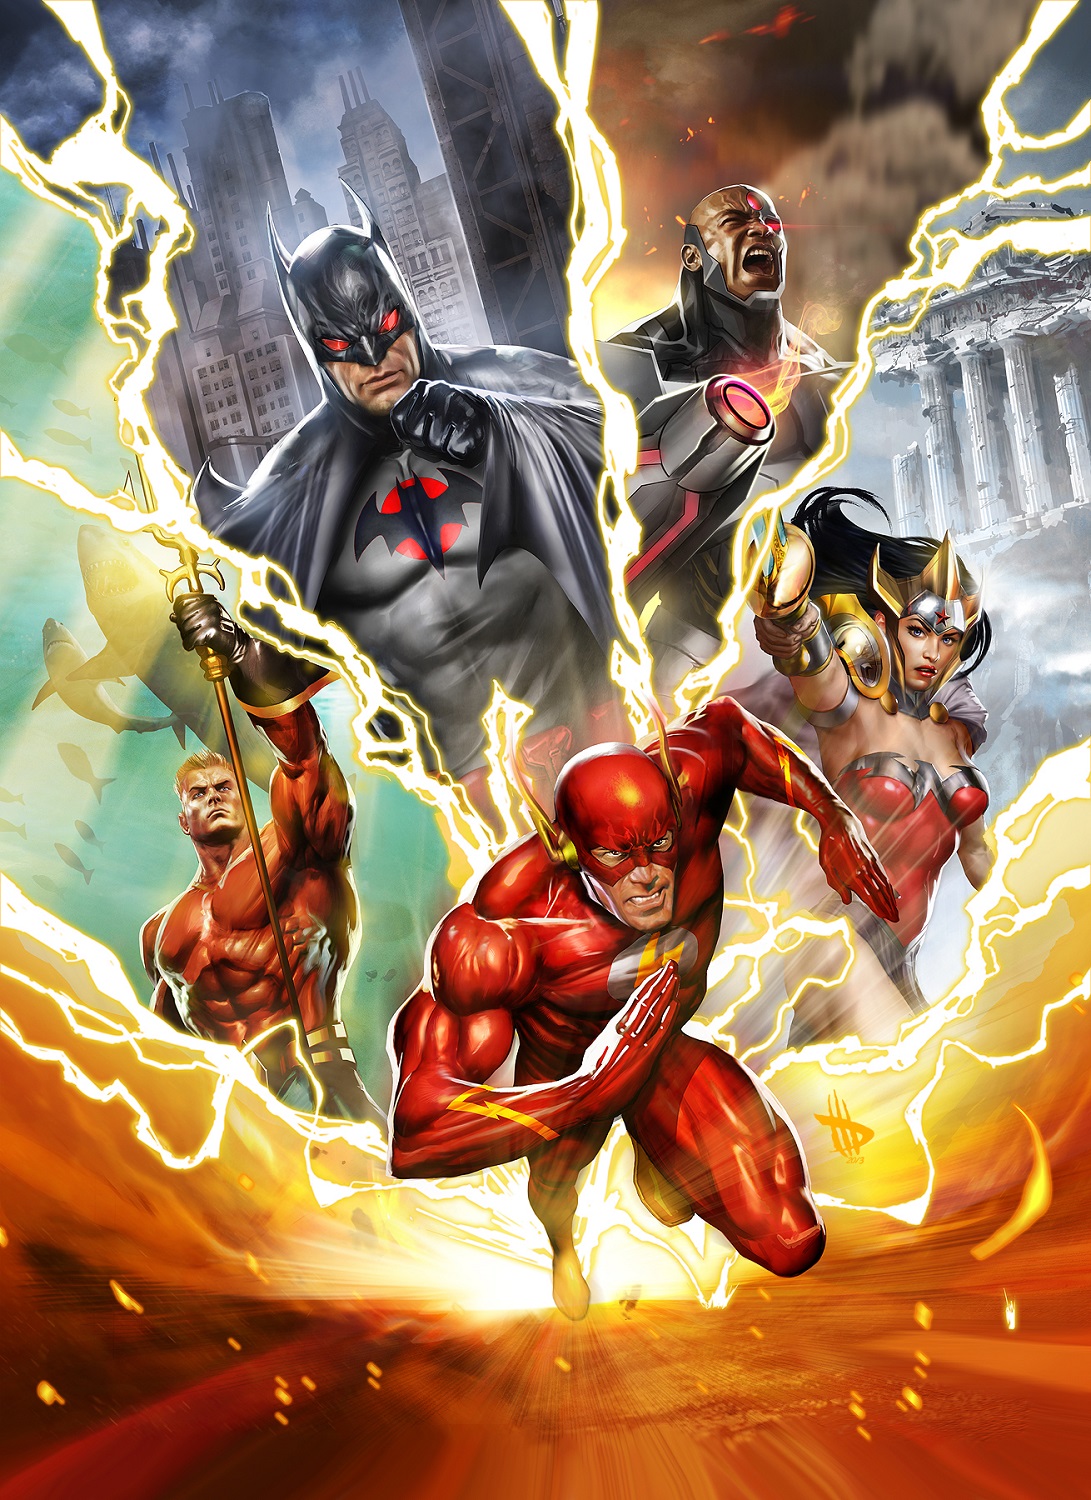 JUSTICE LEAGUE: THE FLASHPOINT PARADOX